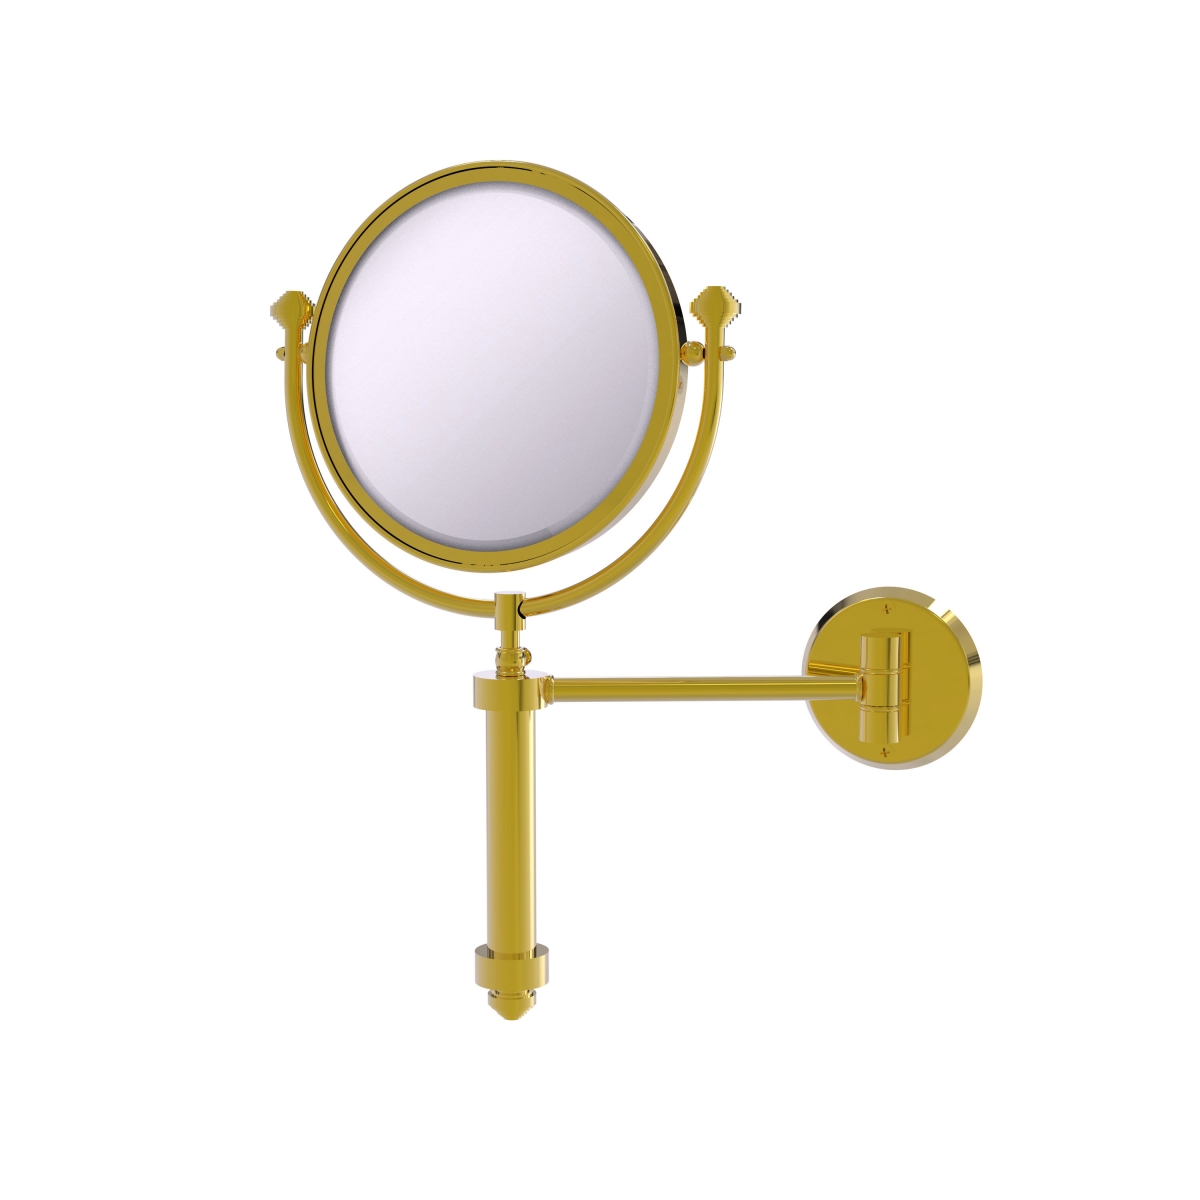 SB-4-2X-PB 8 in. dia. Southbeach Collection Wall Mounted Make-Up Mirror with 2X Magnification, Polished Brass -  Allied Brass, SB-4/2X-PB